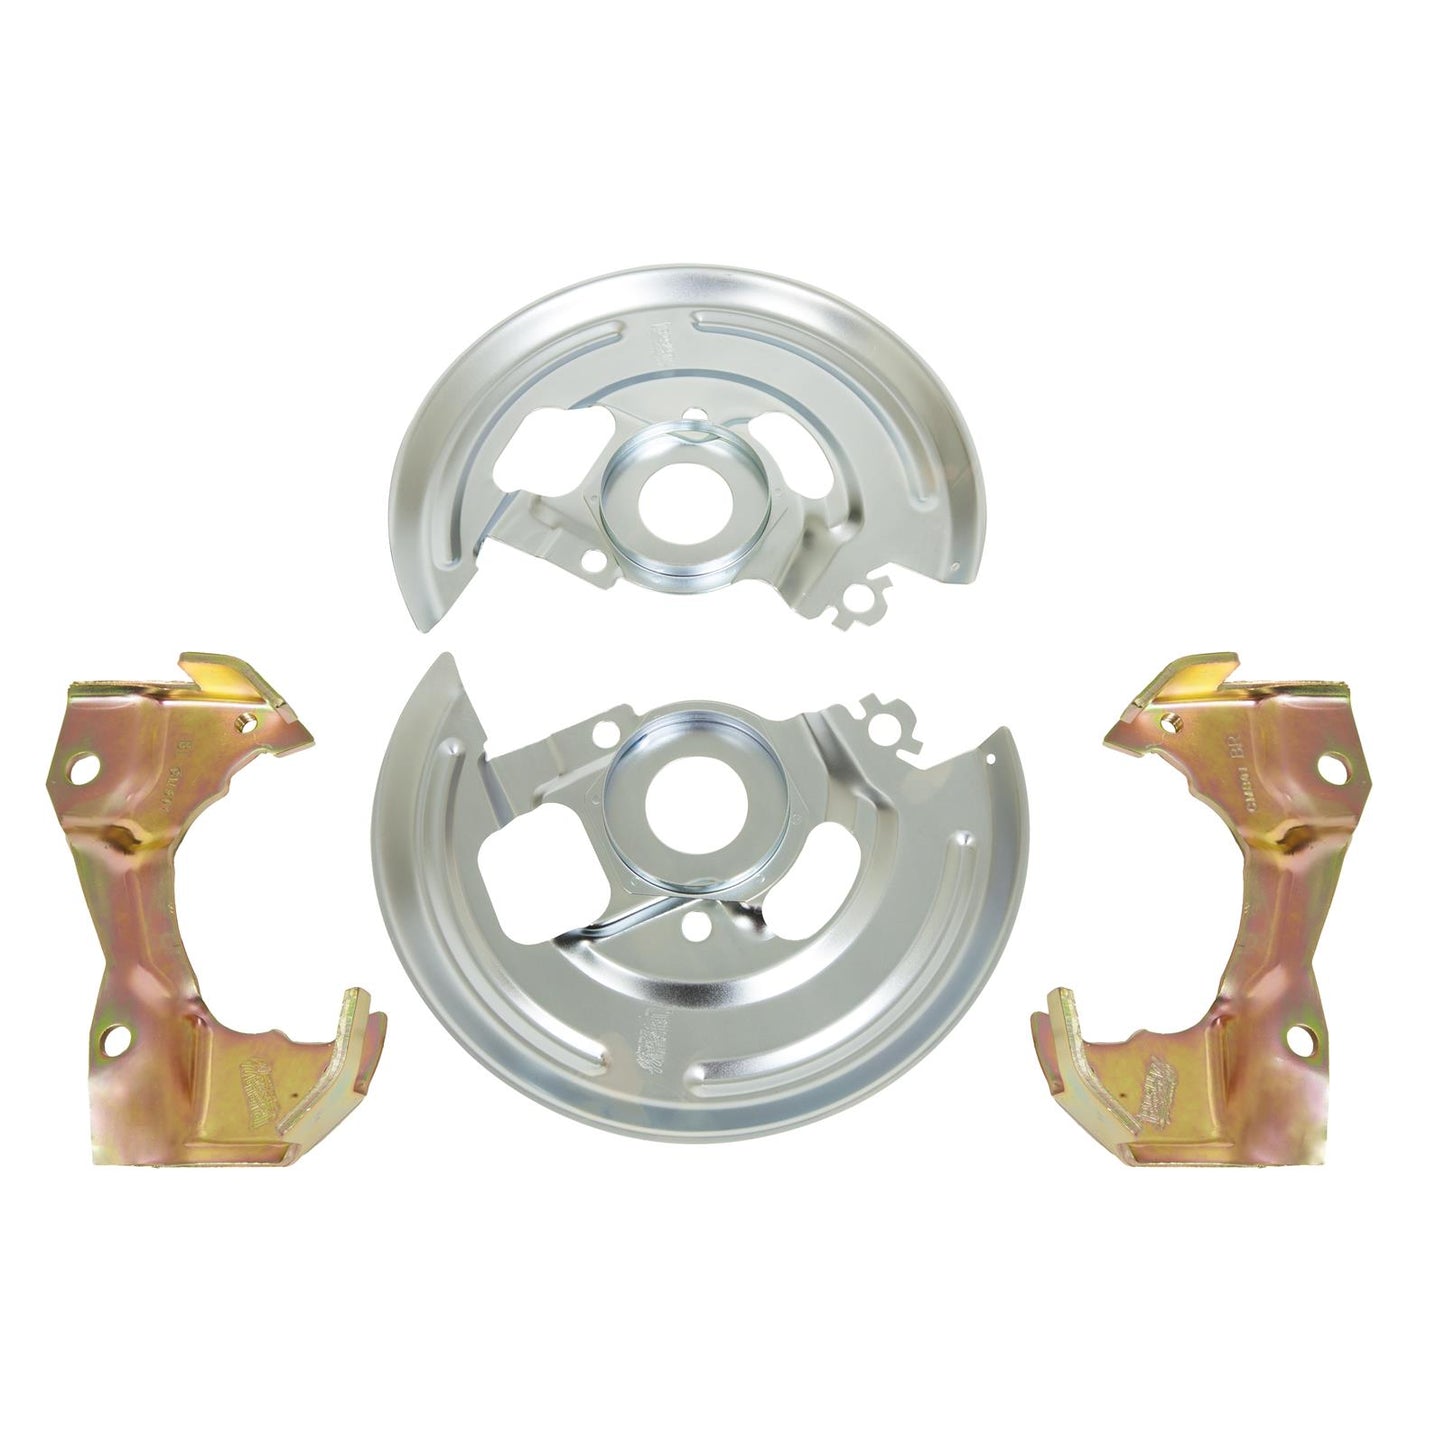 Summit Racing Complete Drum-to-Disc Brake conversion Kits SUM-BK1501 for 1964-1974 Buick, Chevrolet, Oldsmobile, Pontiac